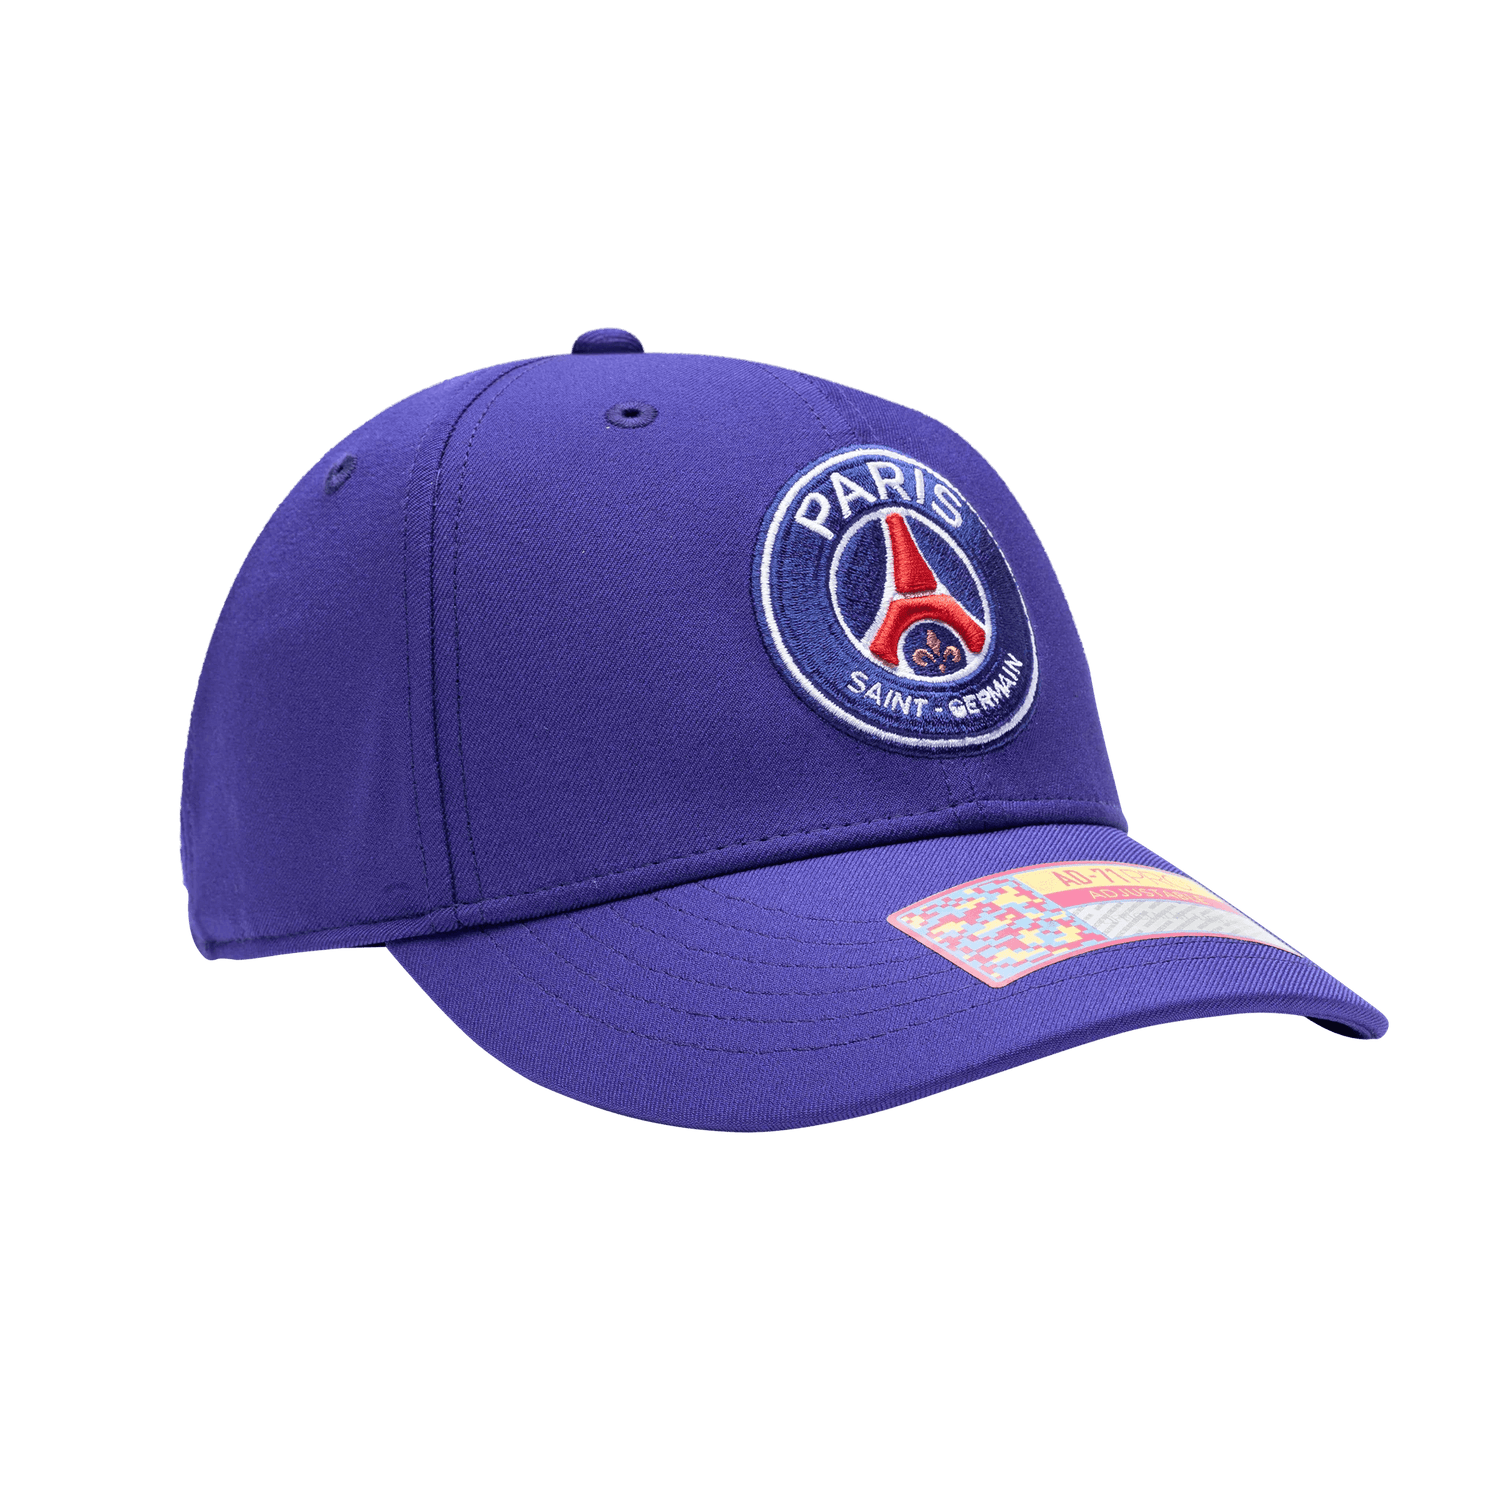 FI Collection Club PSG Standard Adjustable Hat (Lateral - Side 2)